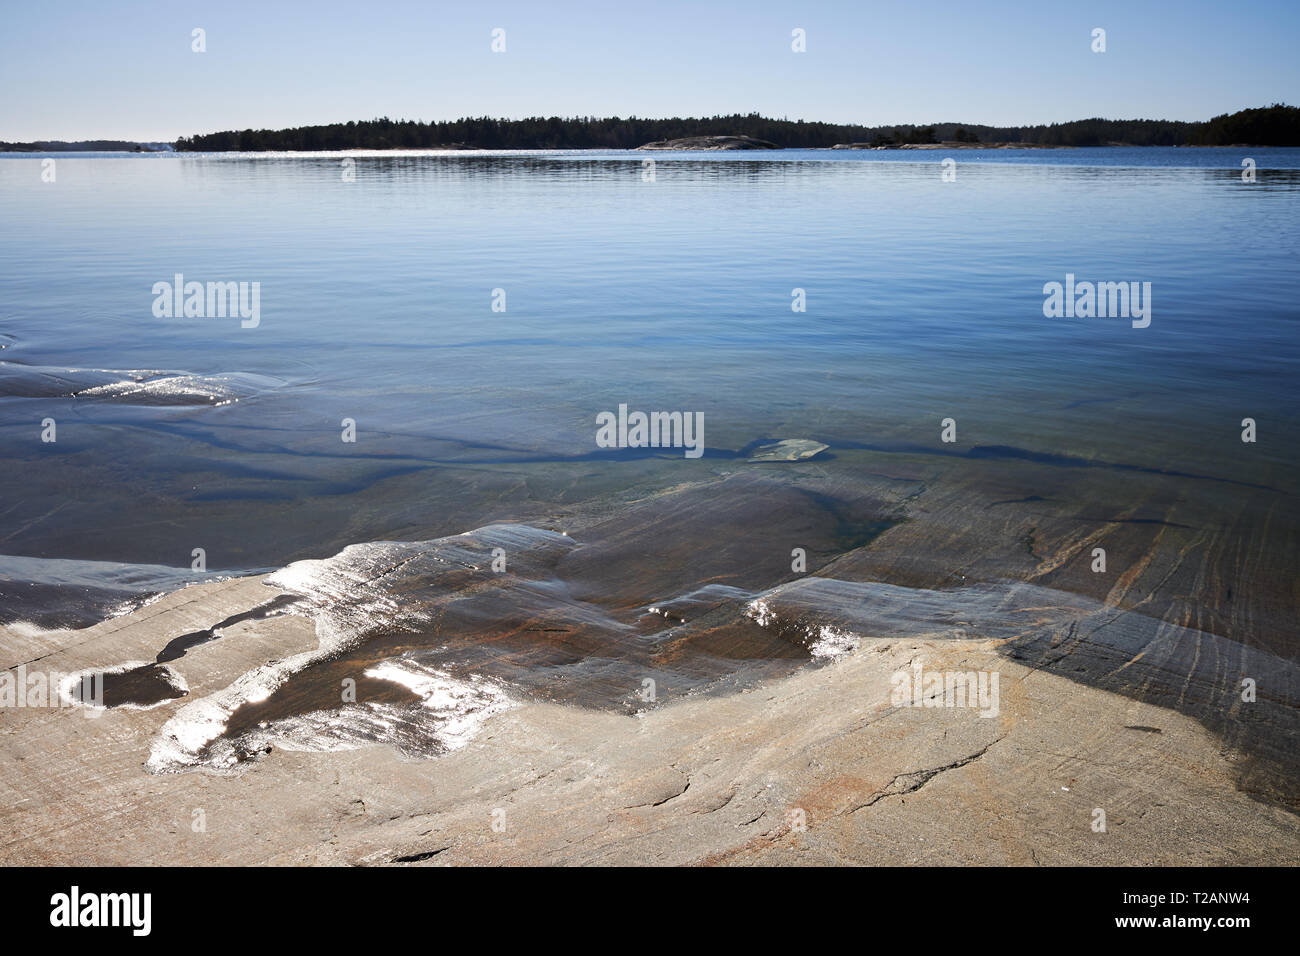 Peaceful summer landscape by the Baltic Sea in Kasnäs, Kemiö, Finland. Wide angle shot of the rocks on the seashore at Finnish archipelago. Stock Photo